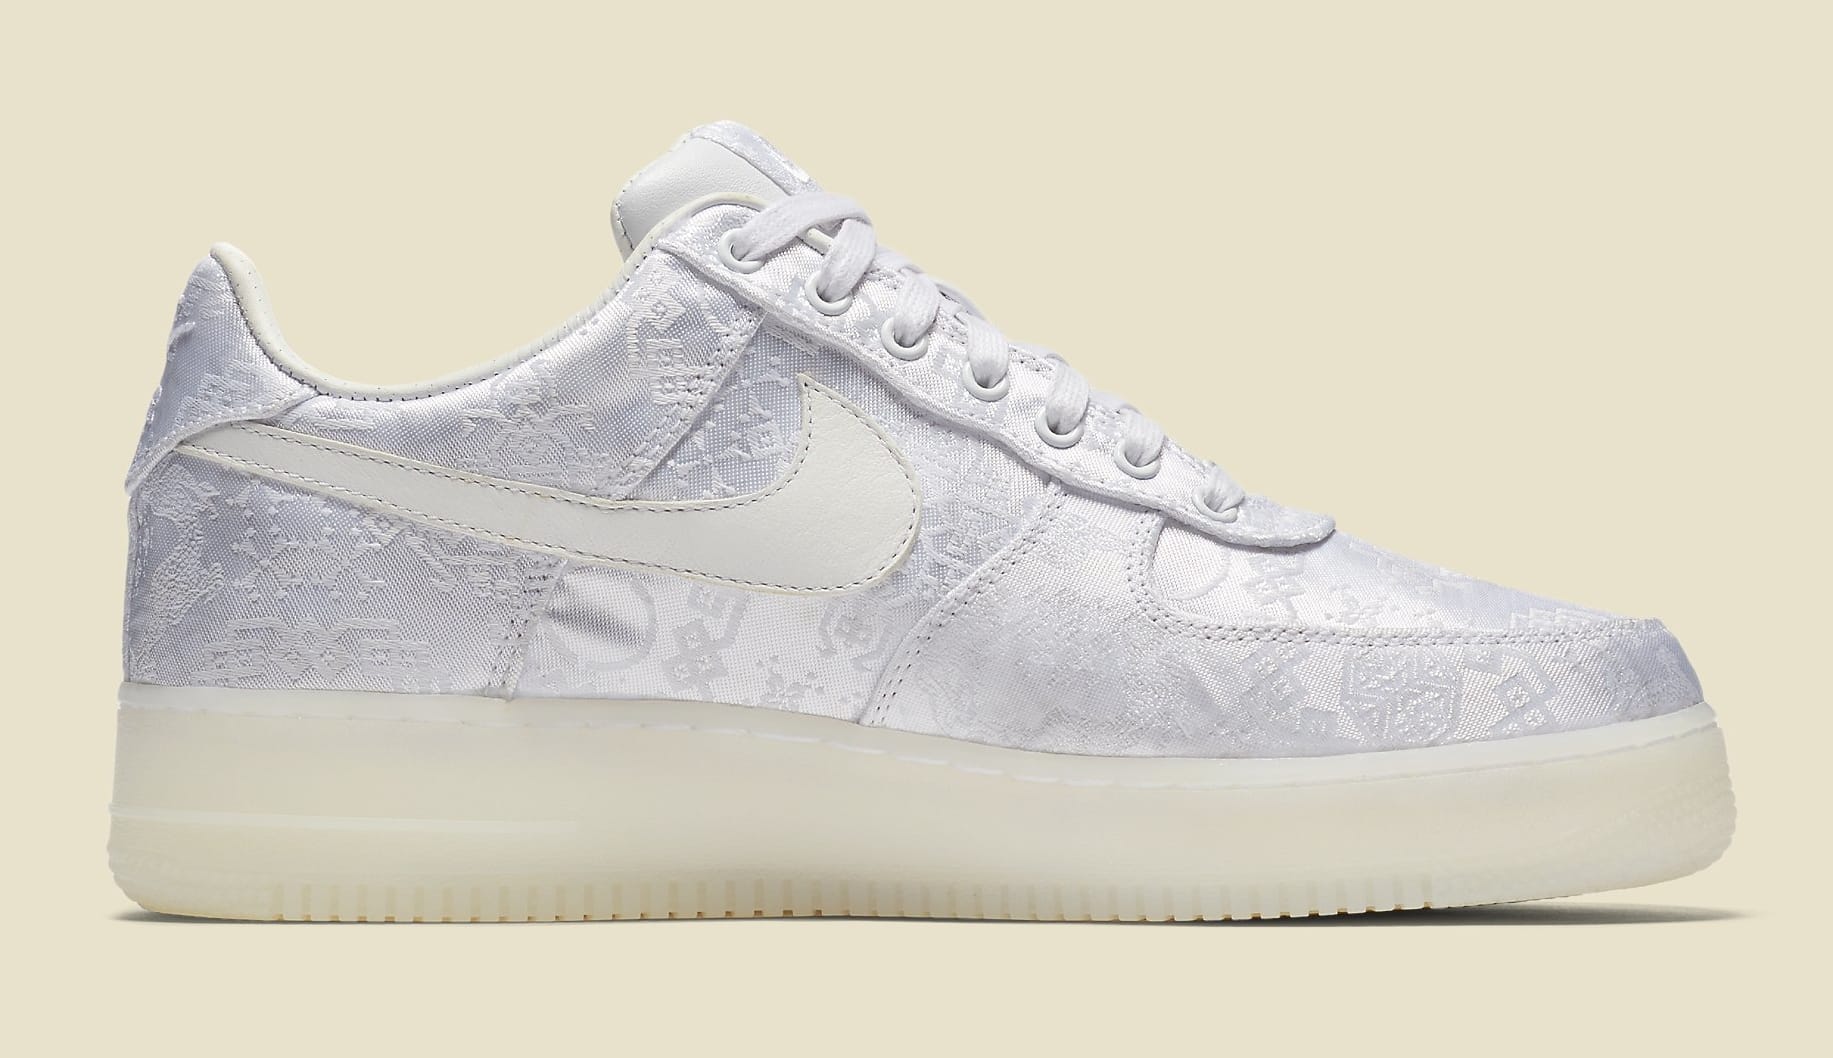 CLOT x Nike Air Force 1 AO9286-100 Official Images | Sole Collector